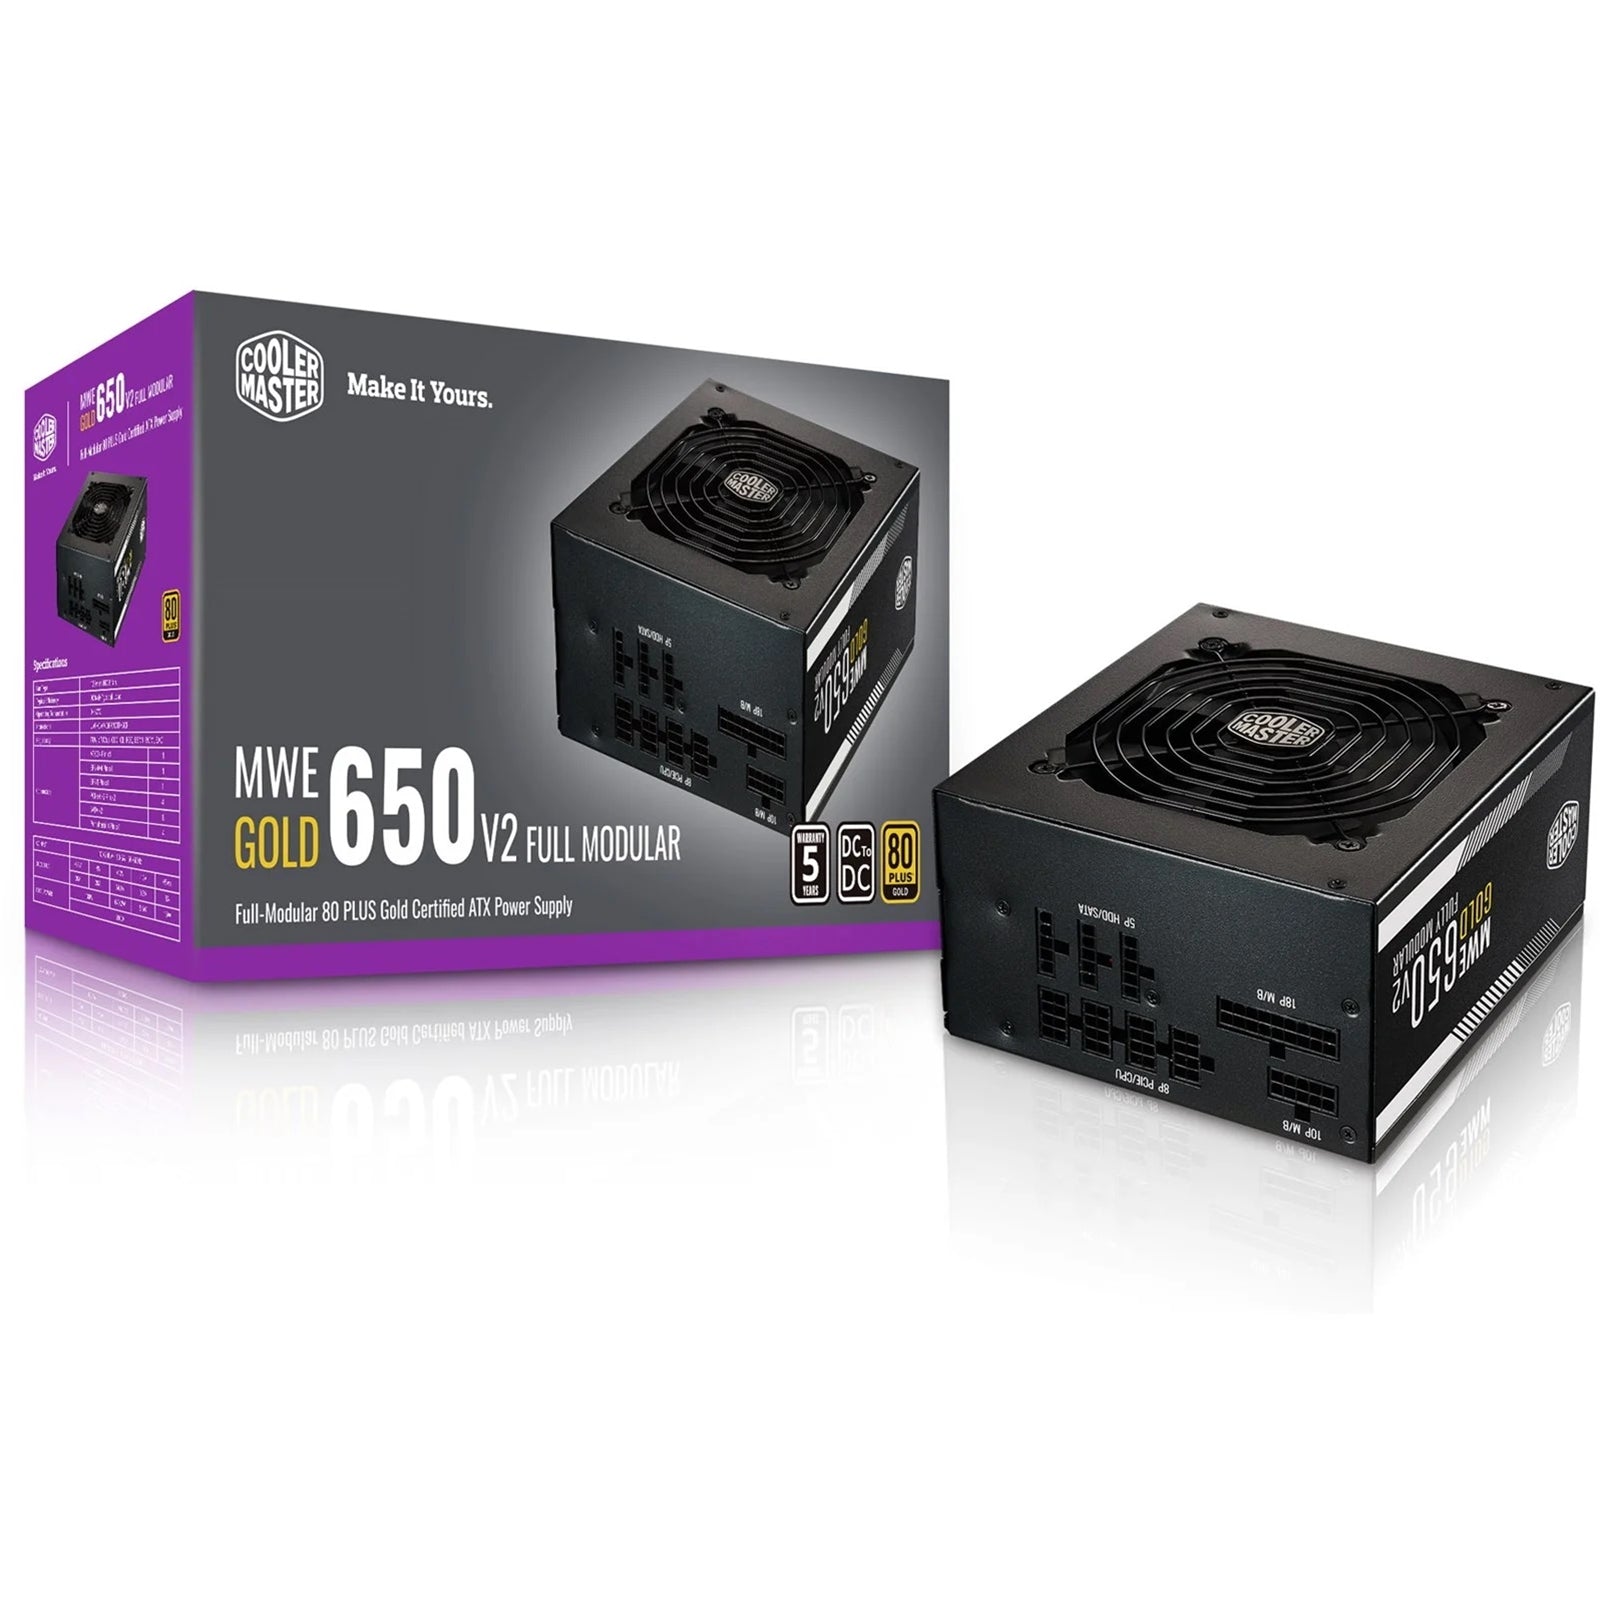 Cooler Master MWE Gold V2 650W PSU 80 PLUS Gold Certified, Fully Modular with Quiet HDB Fan